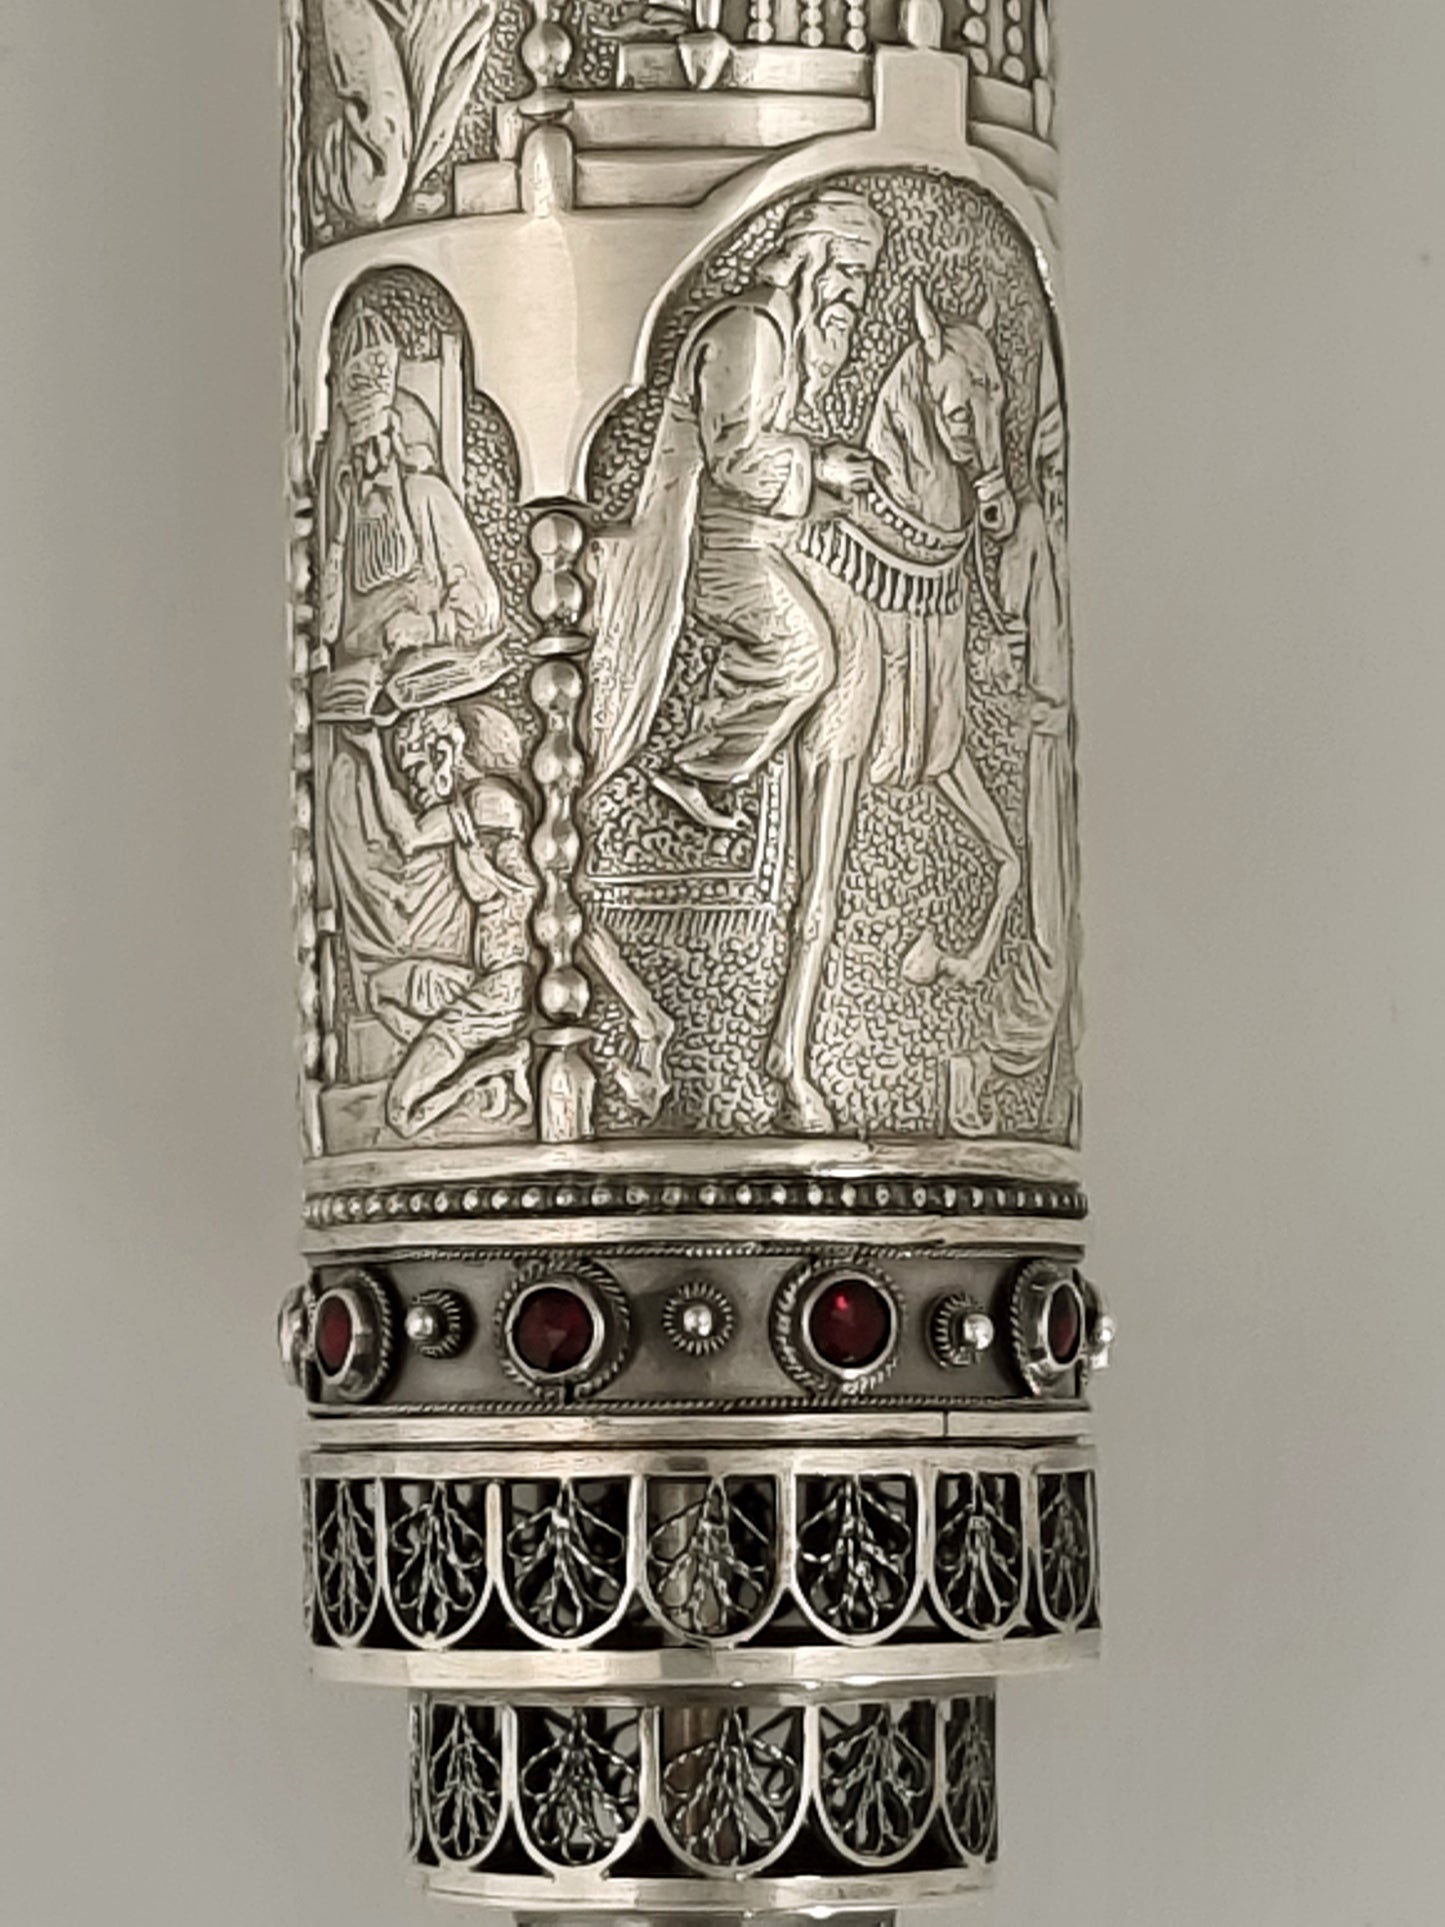 Esther Scroll. This piece was designed in 1928. It is made of sterling silver and ornamented with filigree work and garnets. It is 9” high.